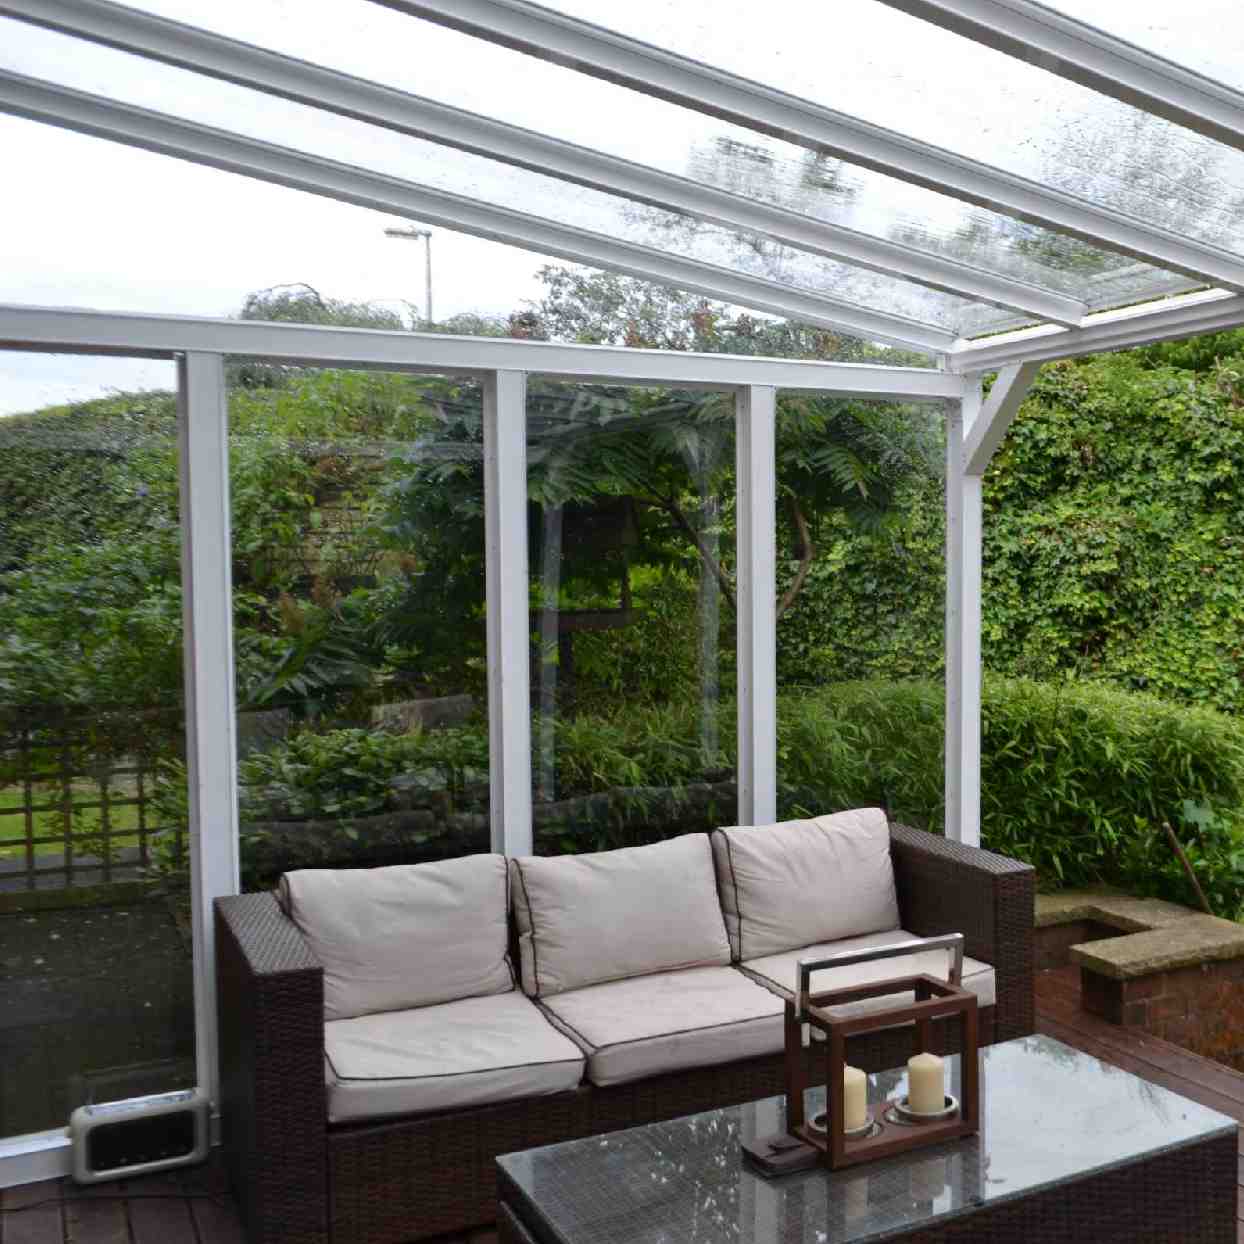 Buy Omega Verandah White with 6mm Glass Clear Plate Polycarbonate Glazing - 9.1m (W) x 3.0m (P), (5) Supporting Posts online today